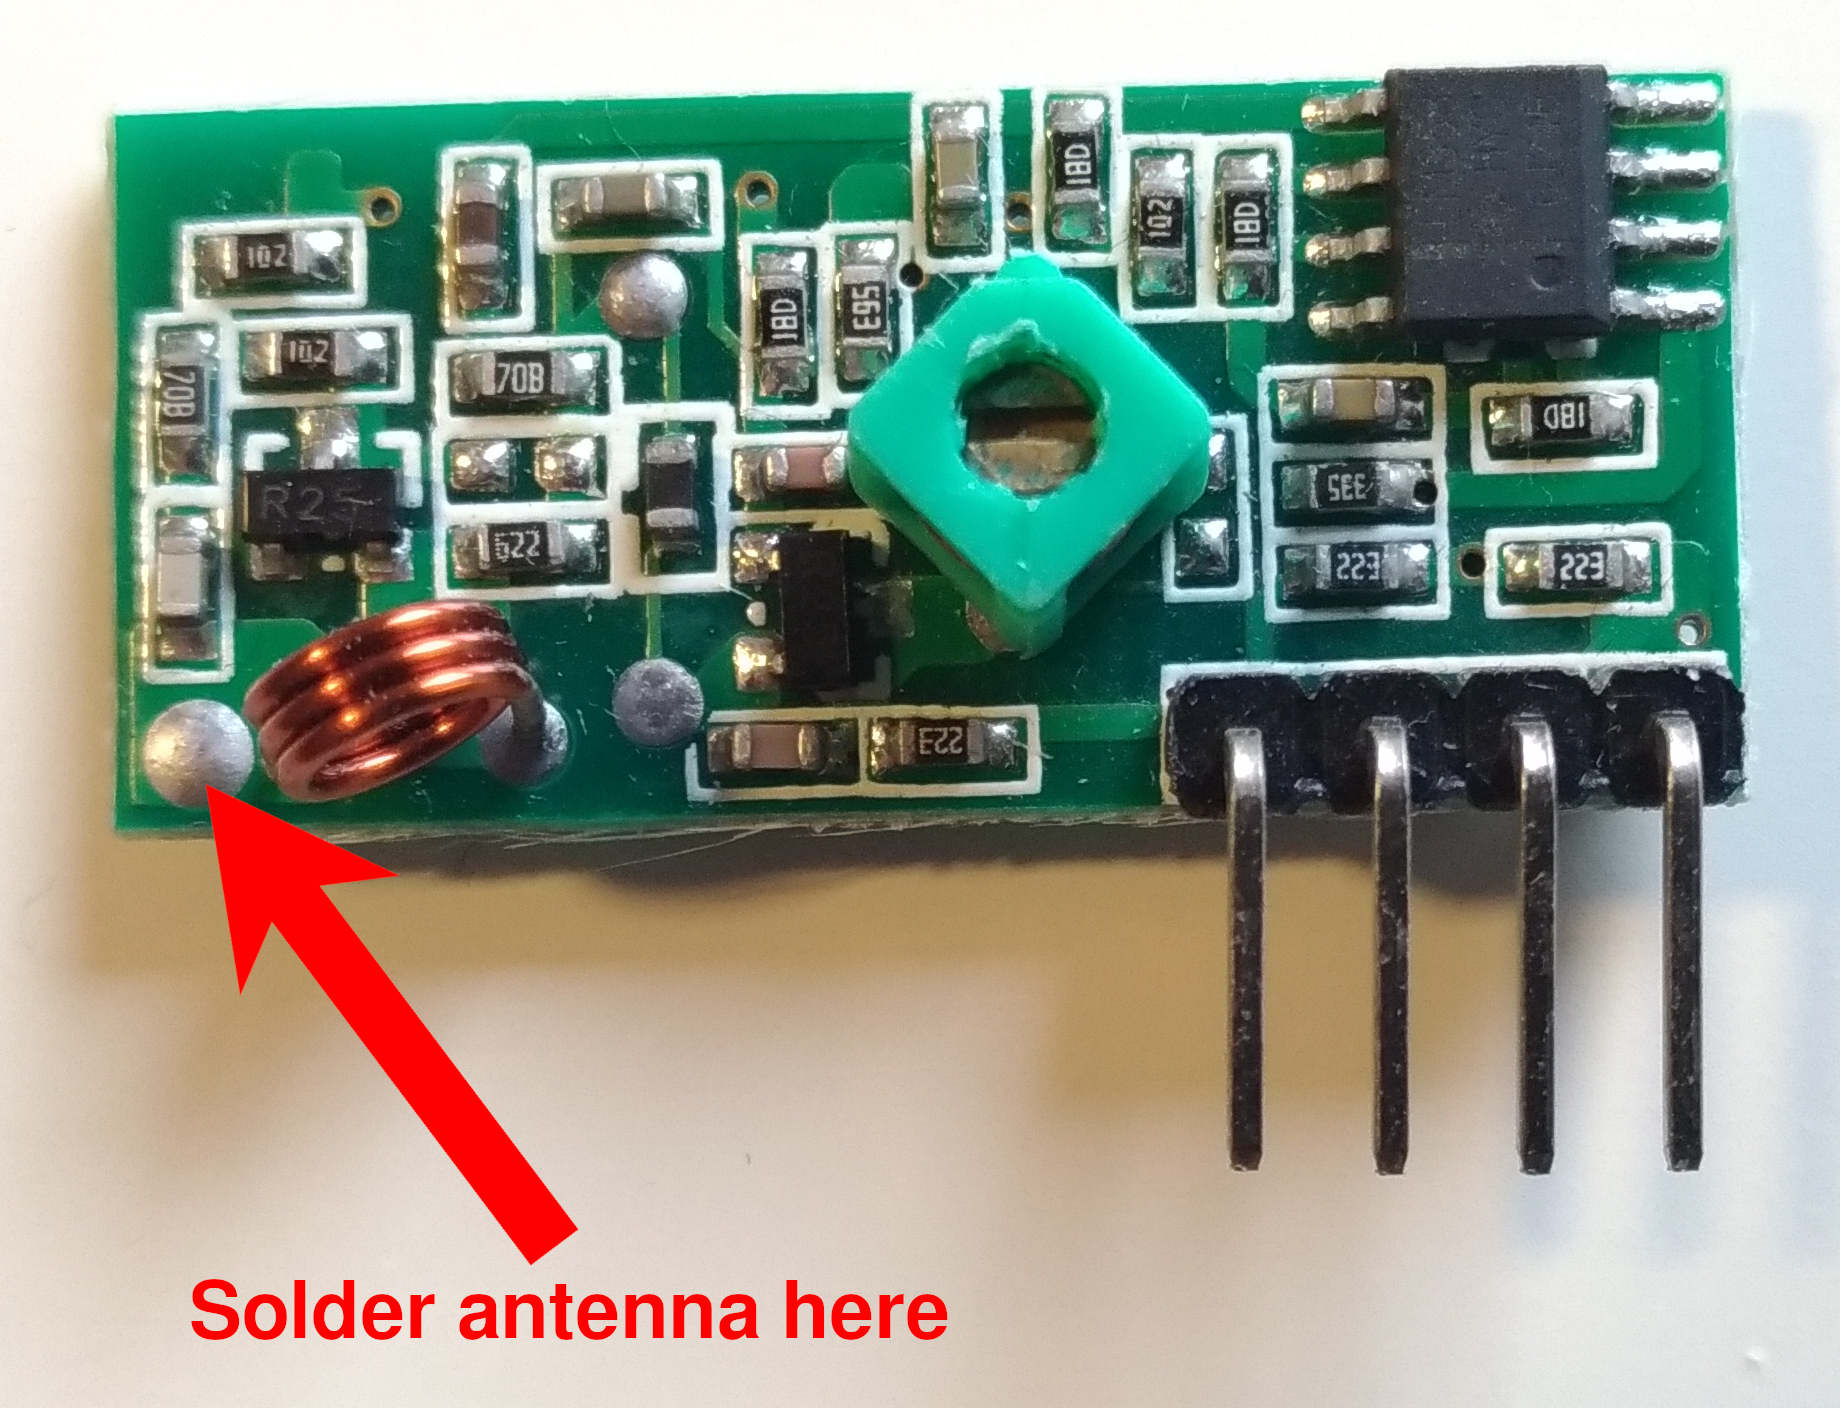 Where to solder the antenna to the receiver module